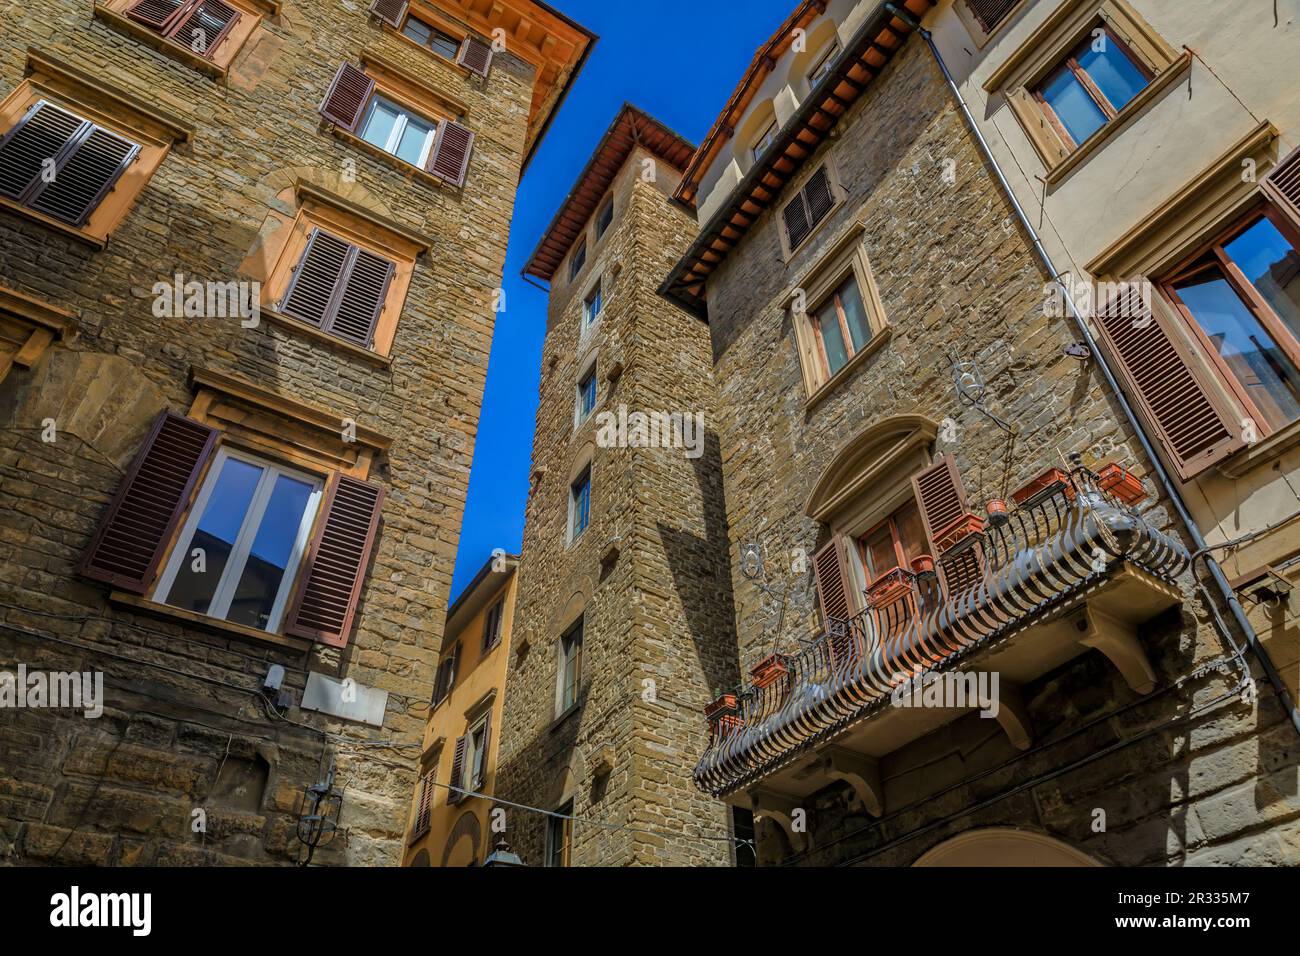 Medieval Renaissance gothic tower buildings along a narrow street in Centro Storico or Historic Centre of Florence, Italy Stock Photo